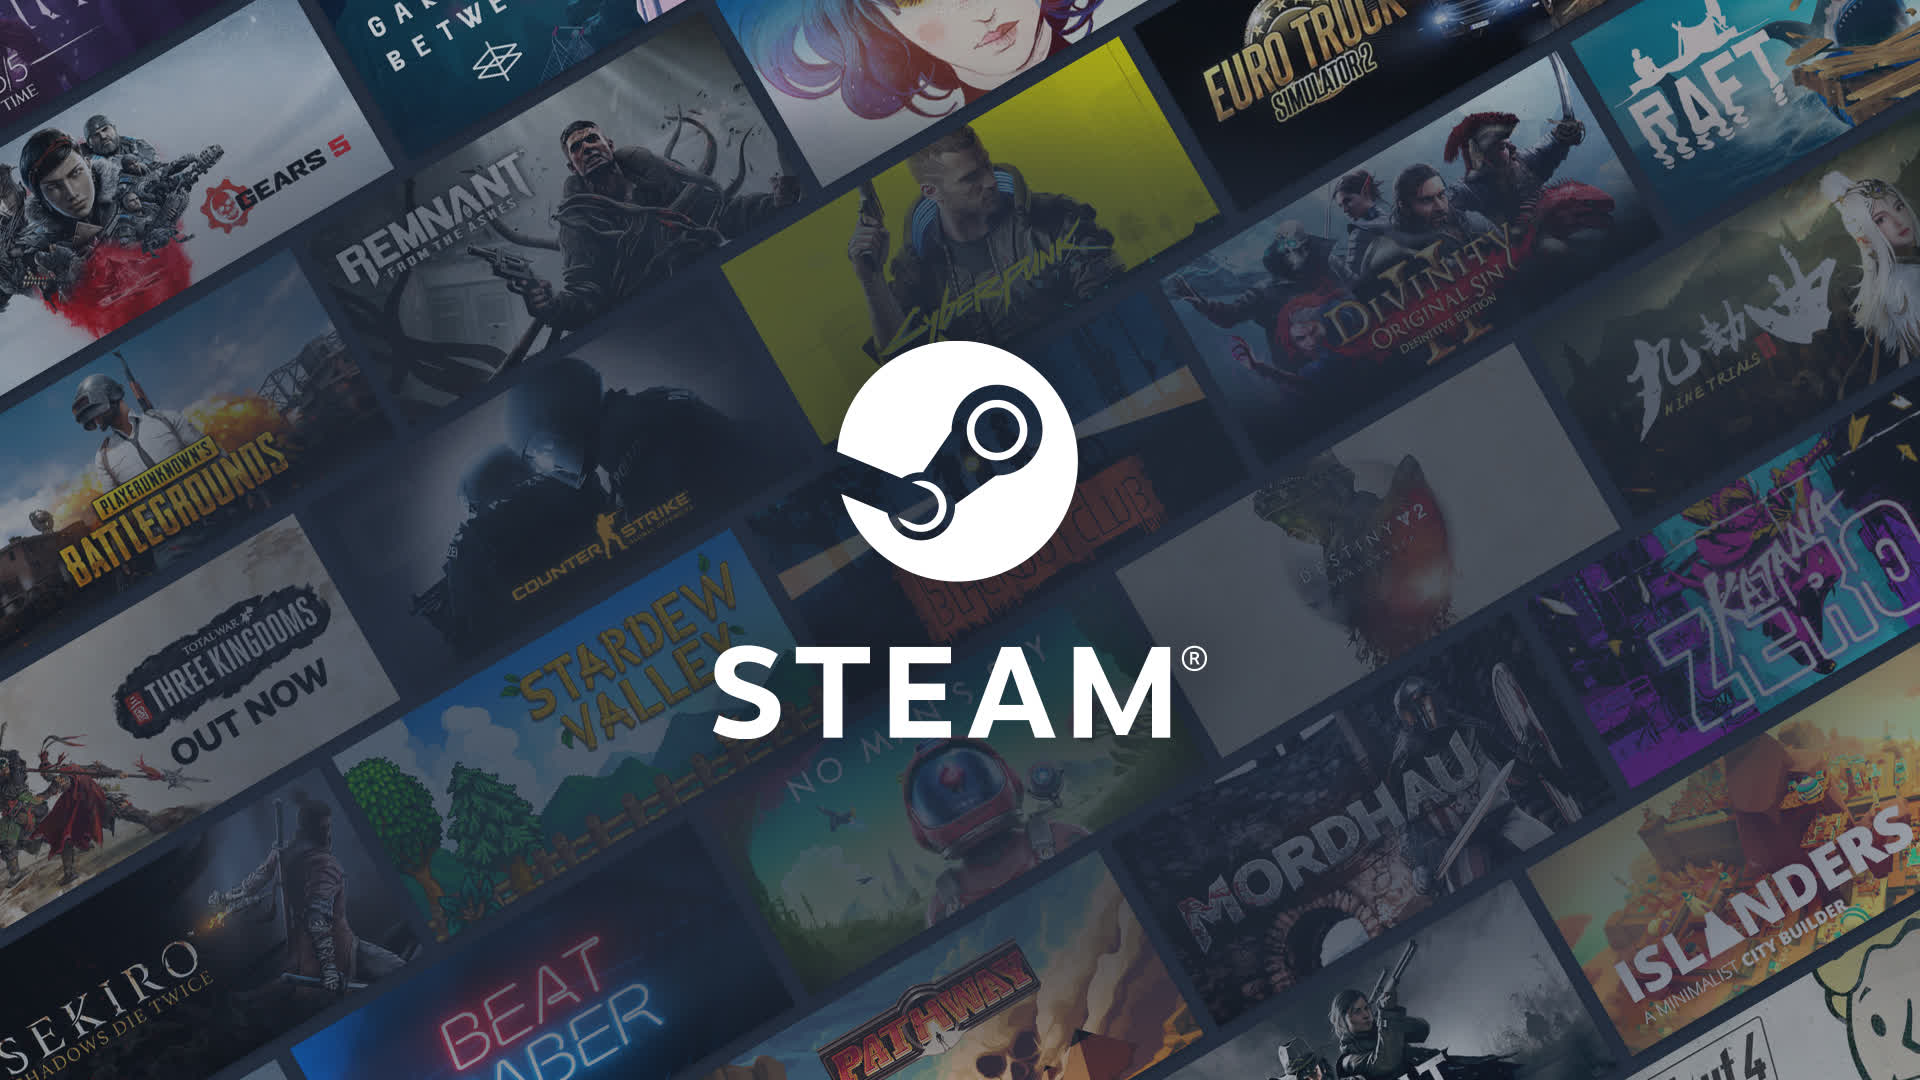 Valve pays researcher $7,500 for discovering exploit that could add unlimited funds to Steam wallets